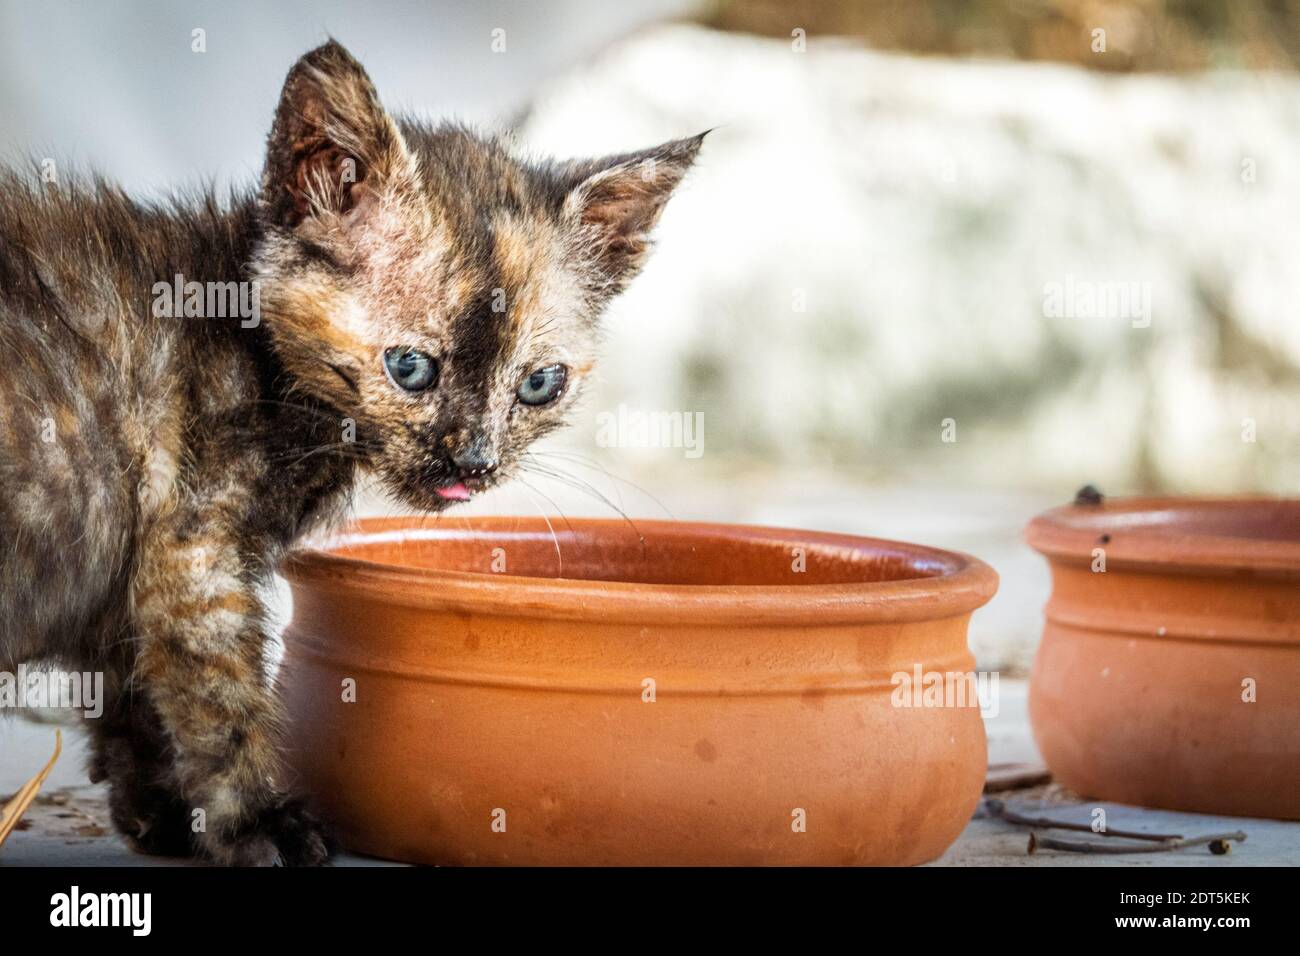 Close-up of kitten with bowls Stock Photo